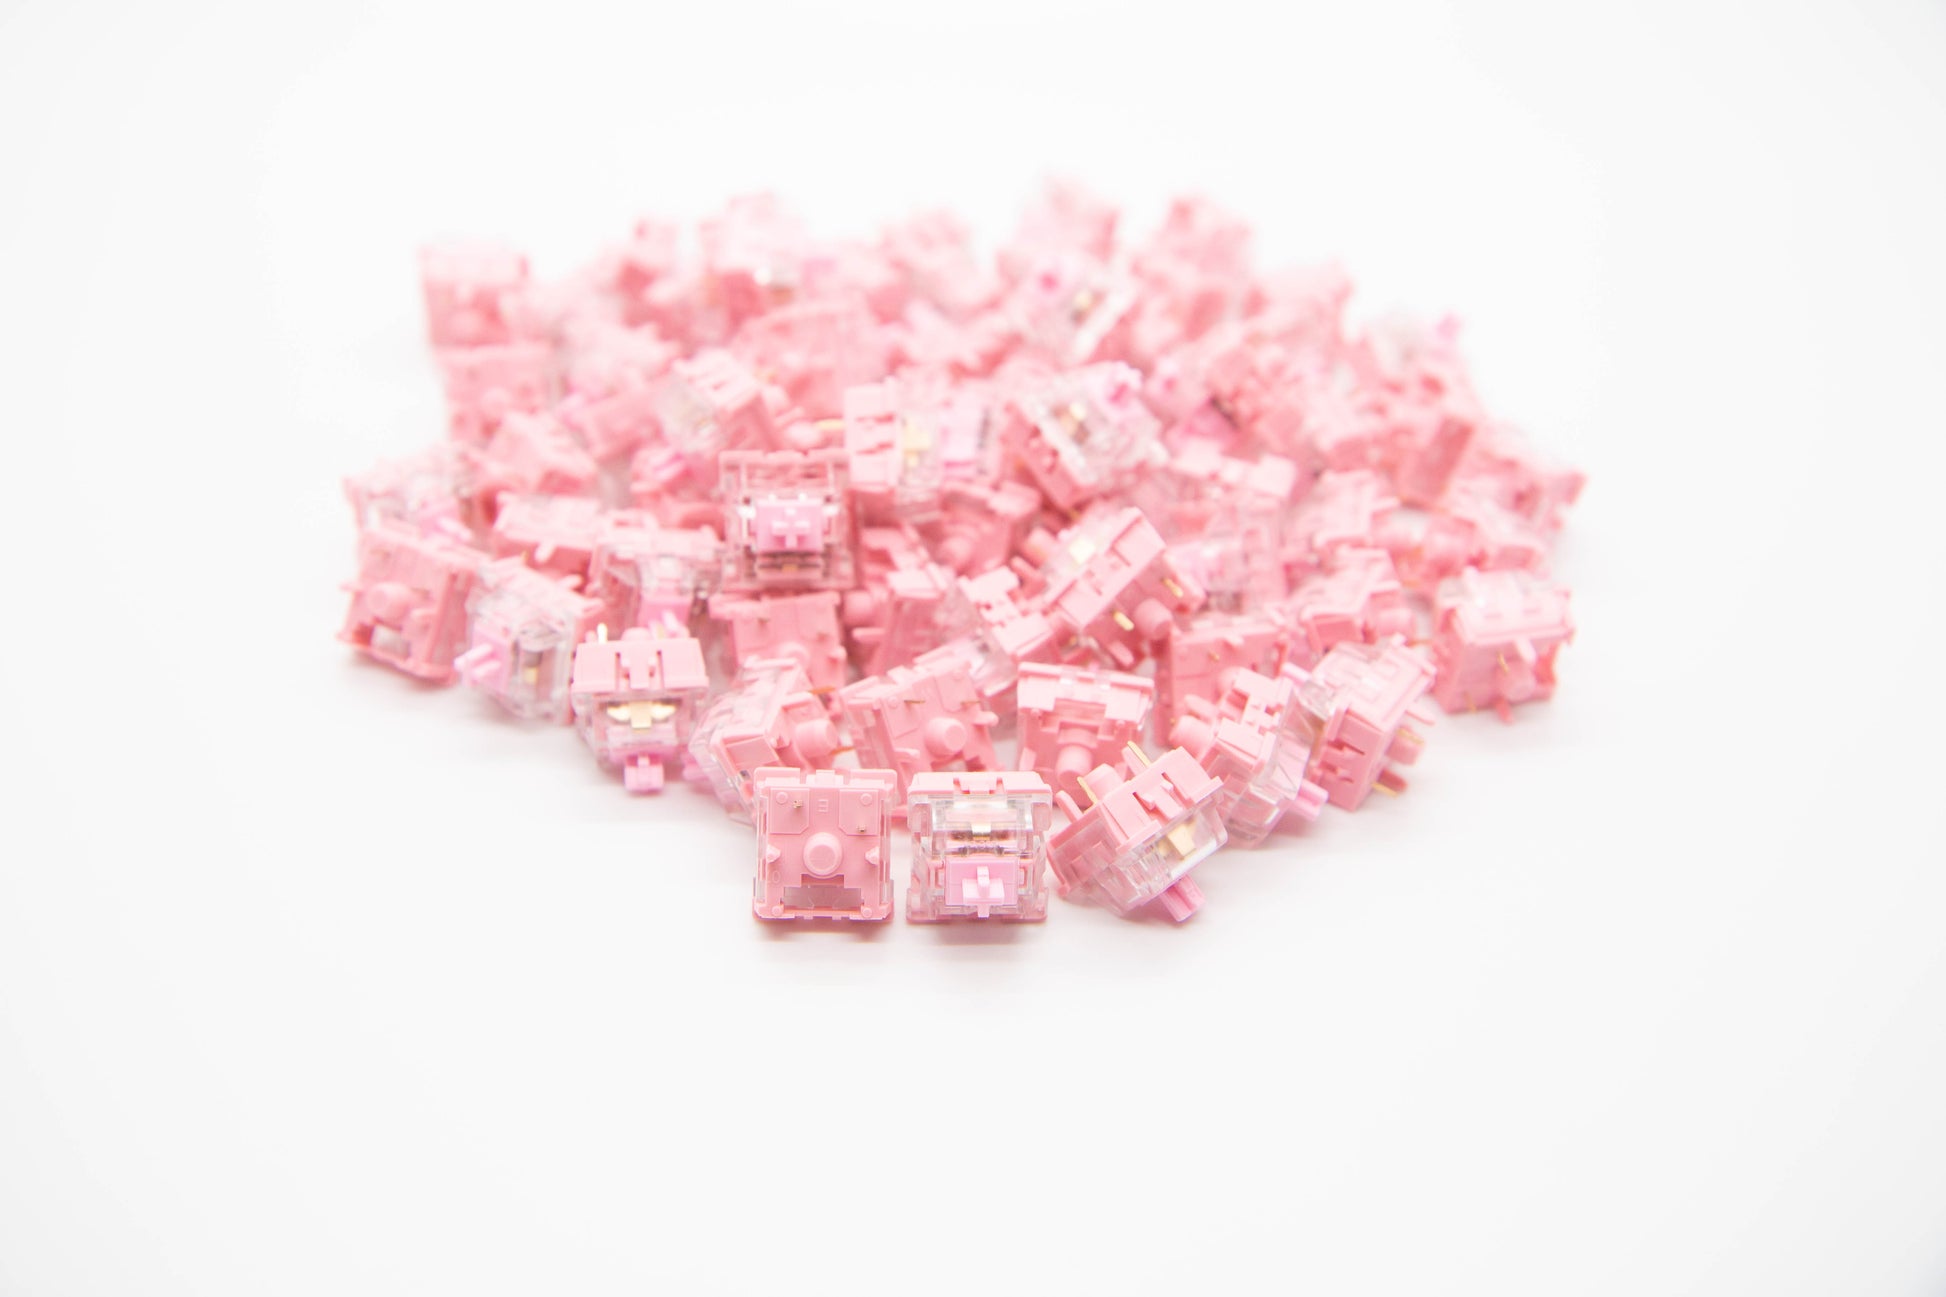 Close-up shot of a pile of KTT Rose mechanical keyboard switches featuring light pink and transparent housing and stems